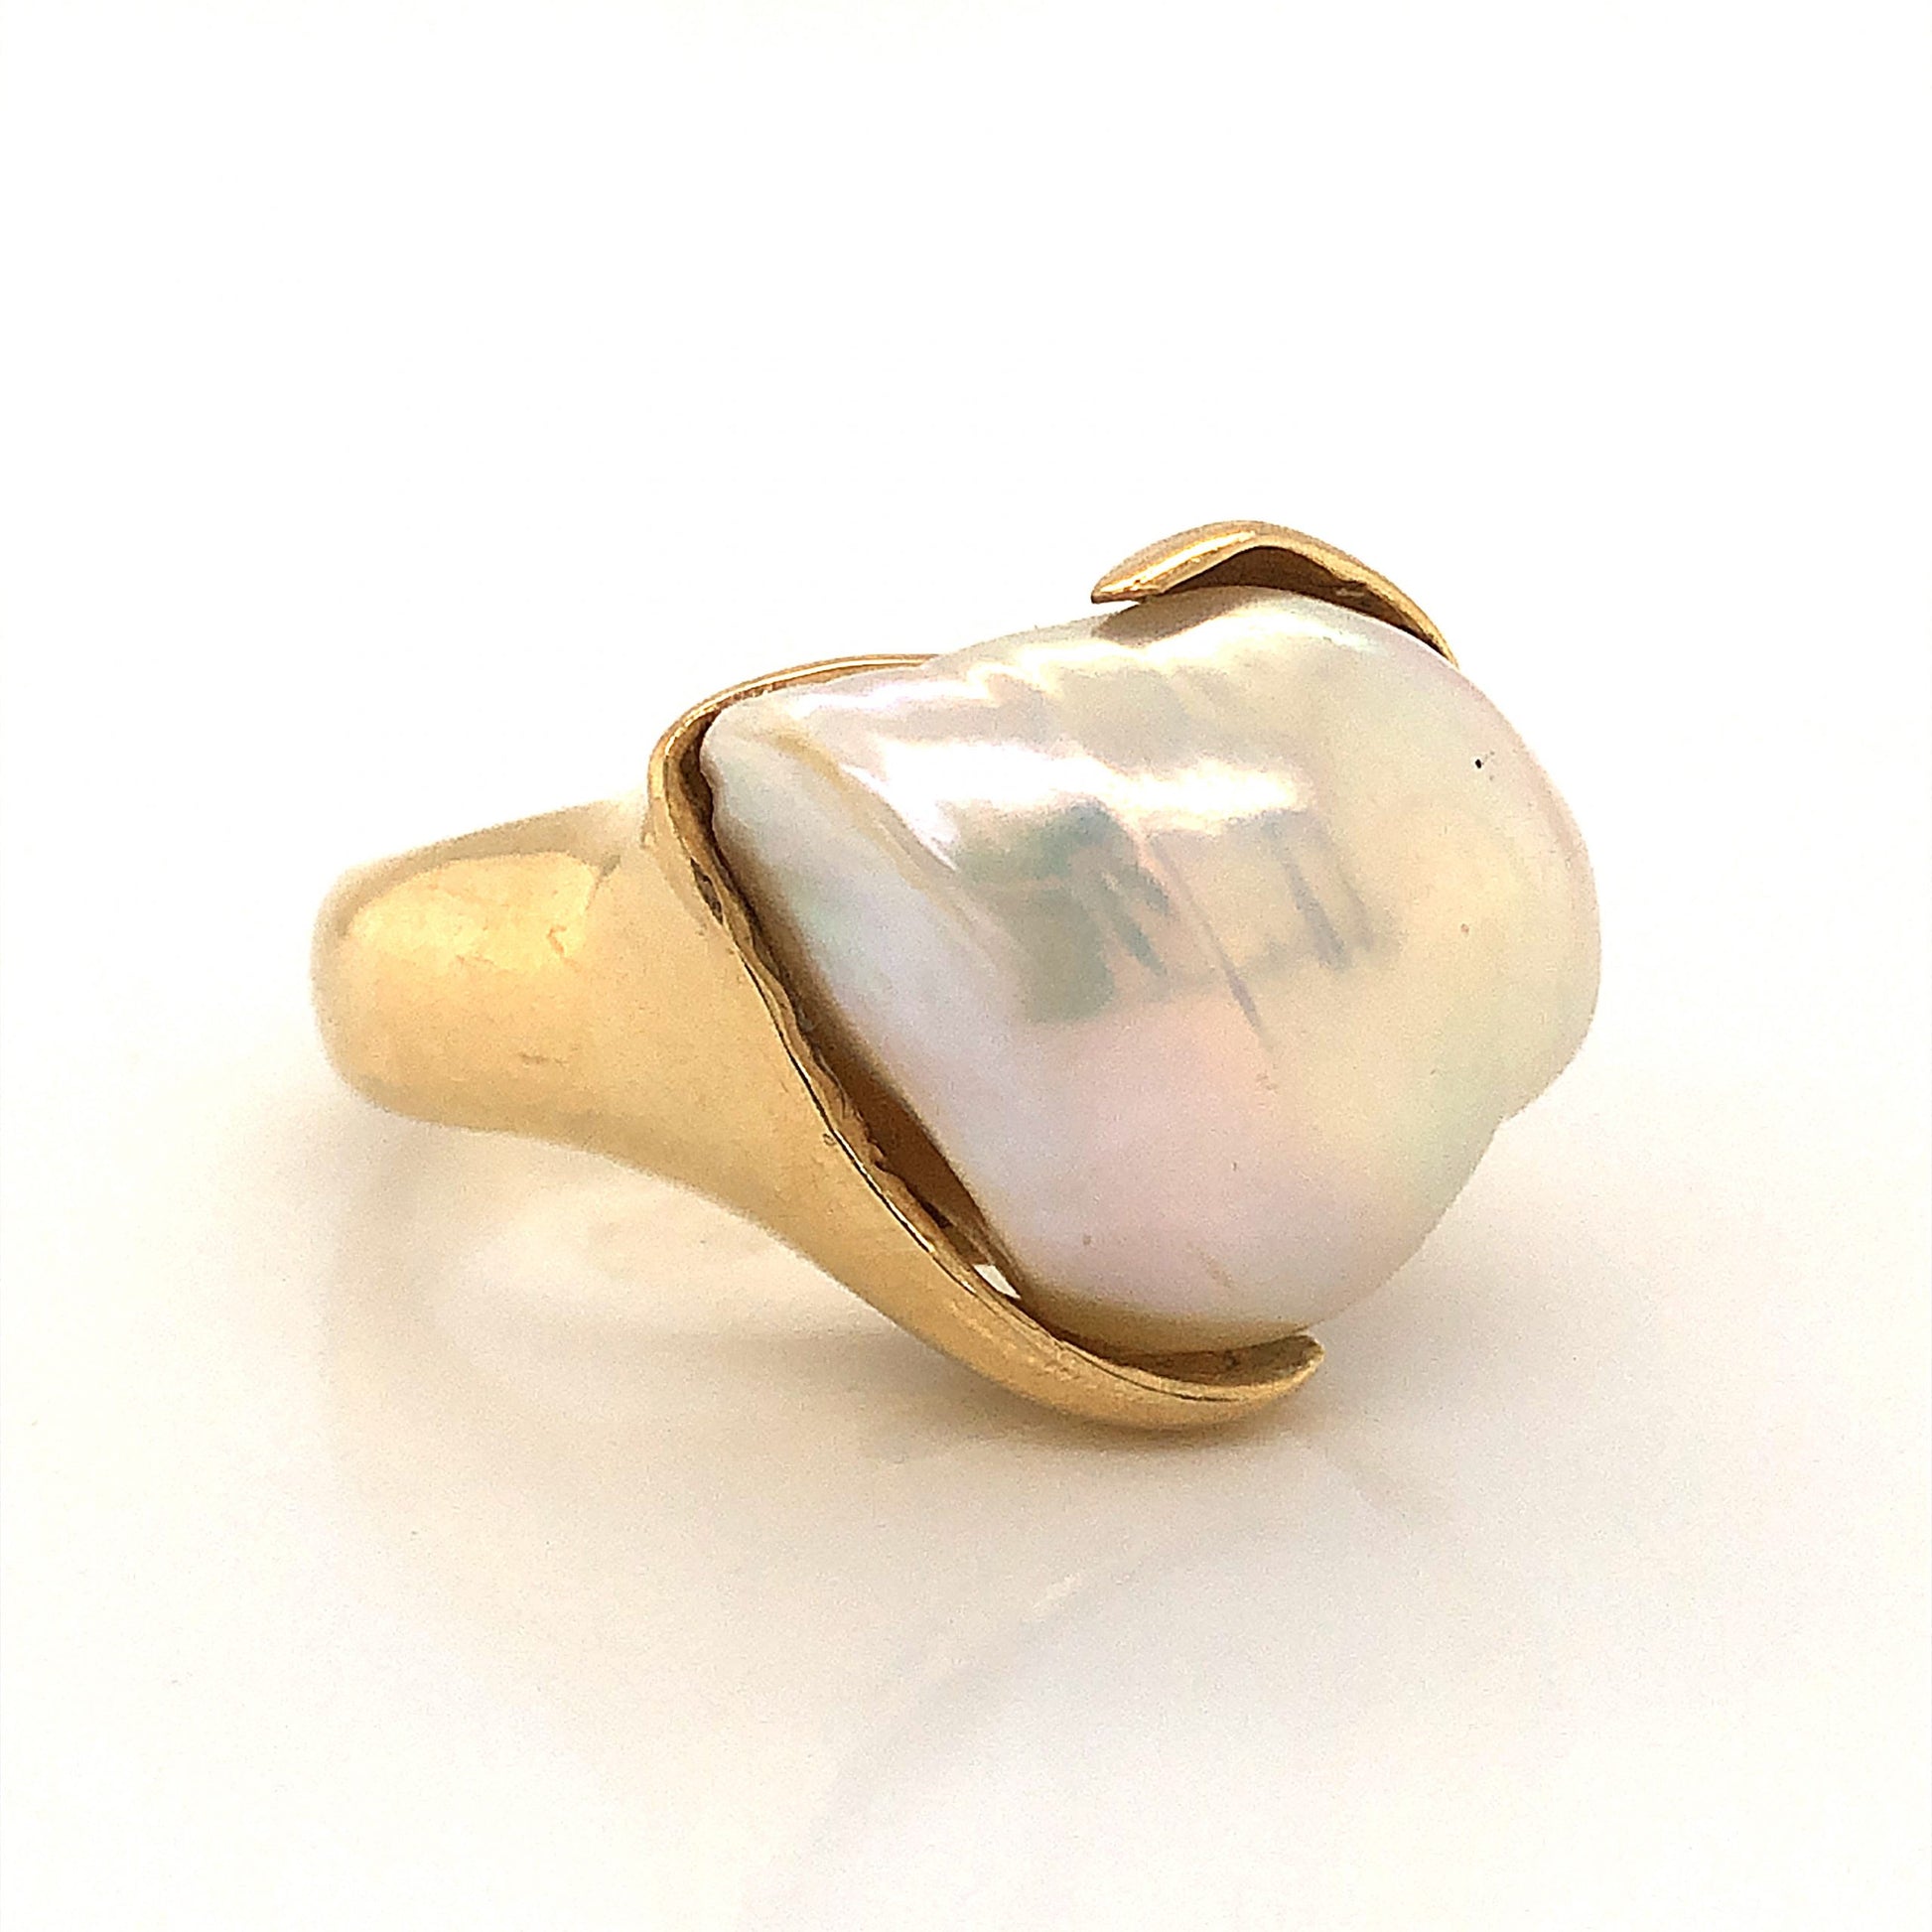 Baroque Pearl Cocktail Ring 18k Yellow GoldComposition: 18 Karat Yellow Gold Ring Size: 6.75 Total Gram Weight: 19.9 g Inscription: 18k
      